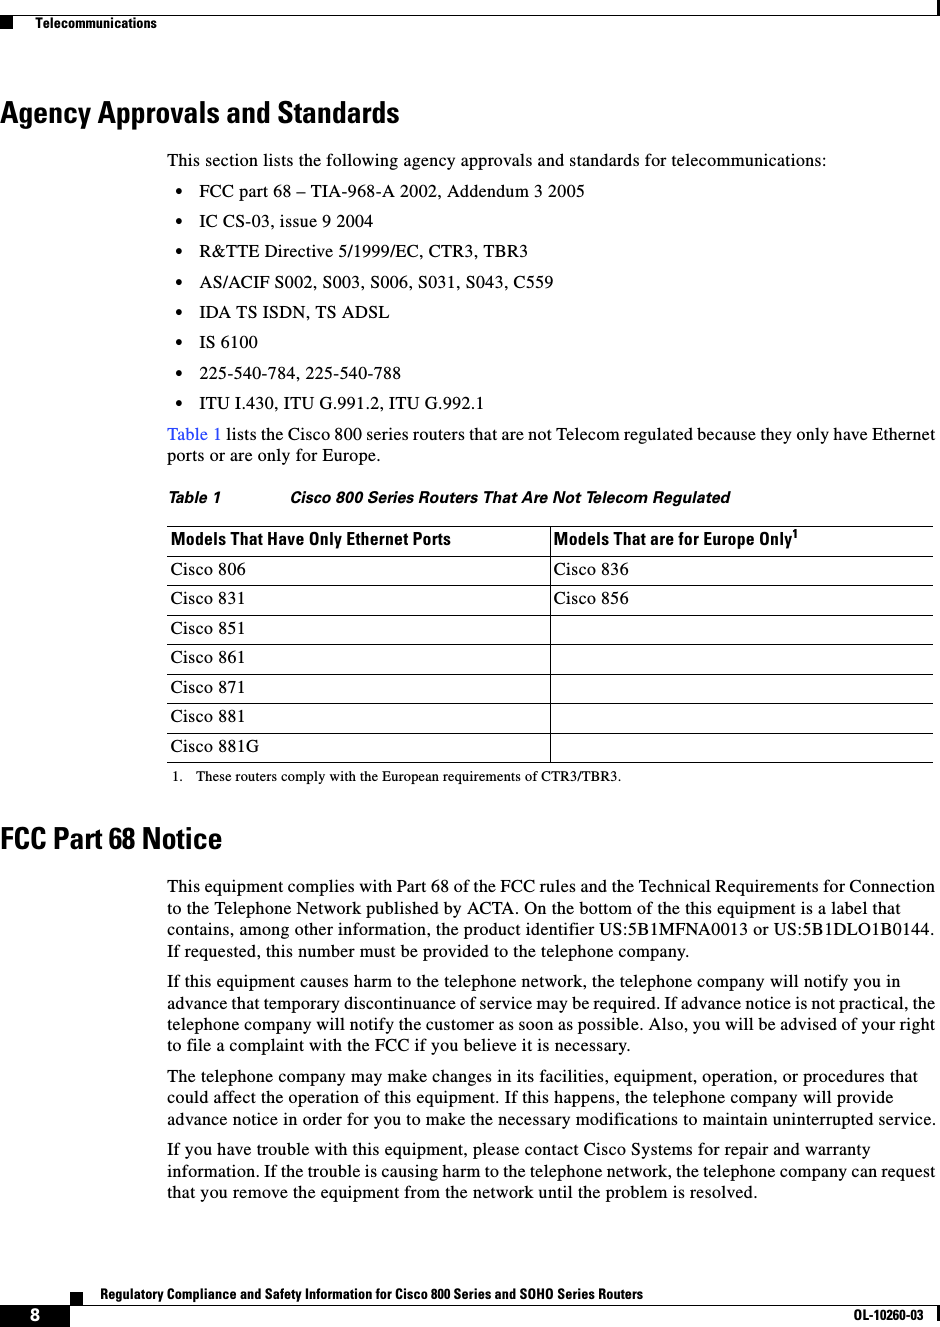  8Regulatory Compliance and Safety Information for Cisco 800 Series and SOHO Series RoutersOL-10260-03  TelecommunicationsAgency Approvals and StandardsThis section lists the following agency approvals and standards for telecommunications:•FCC part 68 – TIA-968-A 2002, Addendum 3 2005•IC CS-03, issue 9 2004•R&amp;TTE Directive 5/1999/EC, CTR3, TBR3•AS/ACIF S002, S003, S006, S031, S043, C559•IDA TS ISDN, TS ADSL•IS 6100•225-540-784, 225-540-788•ITU I.430, ITU G.991.2, ITU G.992.1Table 1 lists the Cisco 800 series routers that are not Telecom regulated because they only have Ethernet ports or are only for Europe.FCC Part 68 NoticeThis equipment complies with Part 68 of the FCC rules and the Technical Requirements for Connection to the Telephone Network published by ACTA. On the bottom of the this equipment is a label that contains, among other information, the product identifier US:5B1MFNA0013 or US:5B1DLO1B0144. If requested, this number must be provided to the telephone company.If this equipment causes harm to the telephone network, the telephone company will notify you in advance that temporary discontinuance of service may be required. If advance notice is not practical, the telephone company will notify the customer as soon as possible. Also, you will be advised of your right to file a complaint with the FCC if you believe it is necessary.The telephone company may make changes in its facilities, equipment, operation, or procedures that could affect the operation of this equipment. If this happens, the telephone company will provide advance notice in order for you to make the necessary modifications to maintain uninterrupted service.If you have trouble with this equipment, please contact Cisco Systems for repair and warranty information. If the trouble is causing harm to the telephone network, the telephone company can request that you remove the equipment from the network until the problem is resolved.Table 1 Cisco 800 Series Routers That Are Not Telecom RegulatedModels That Have Only Ethernet Ports Models That are for Europe Only11. These routers comply with the European requirements of CTR3/TBR3.Cisco 806 Cisco 836Cisco 831 Cisco 856Cisco 851Cisco 861Cisco 871Cisco 881Cisco 881G